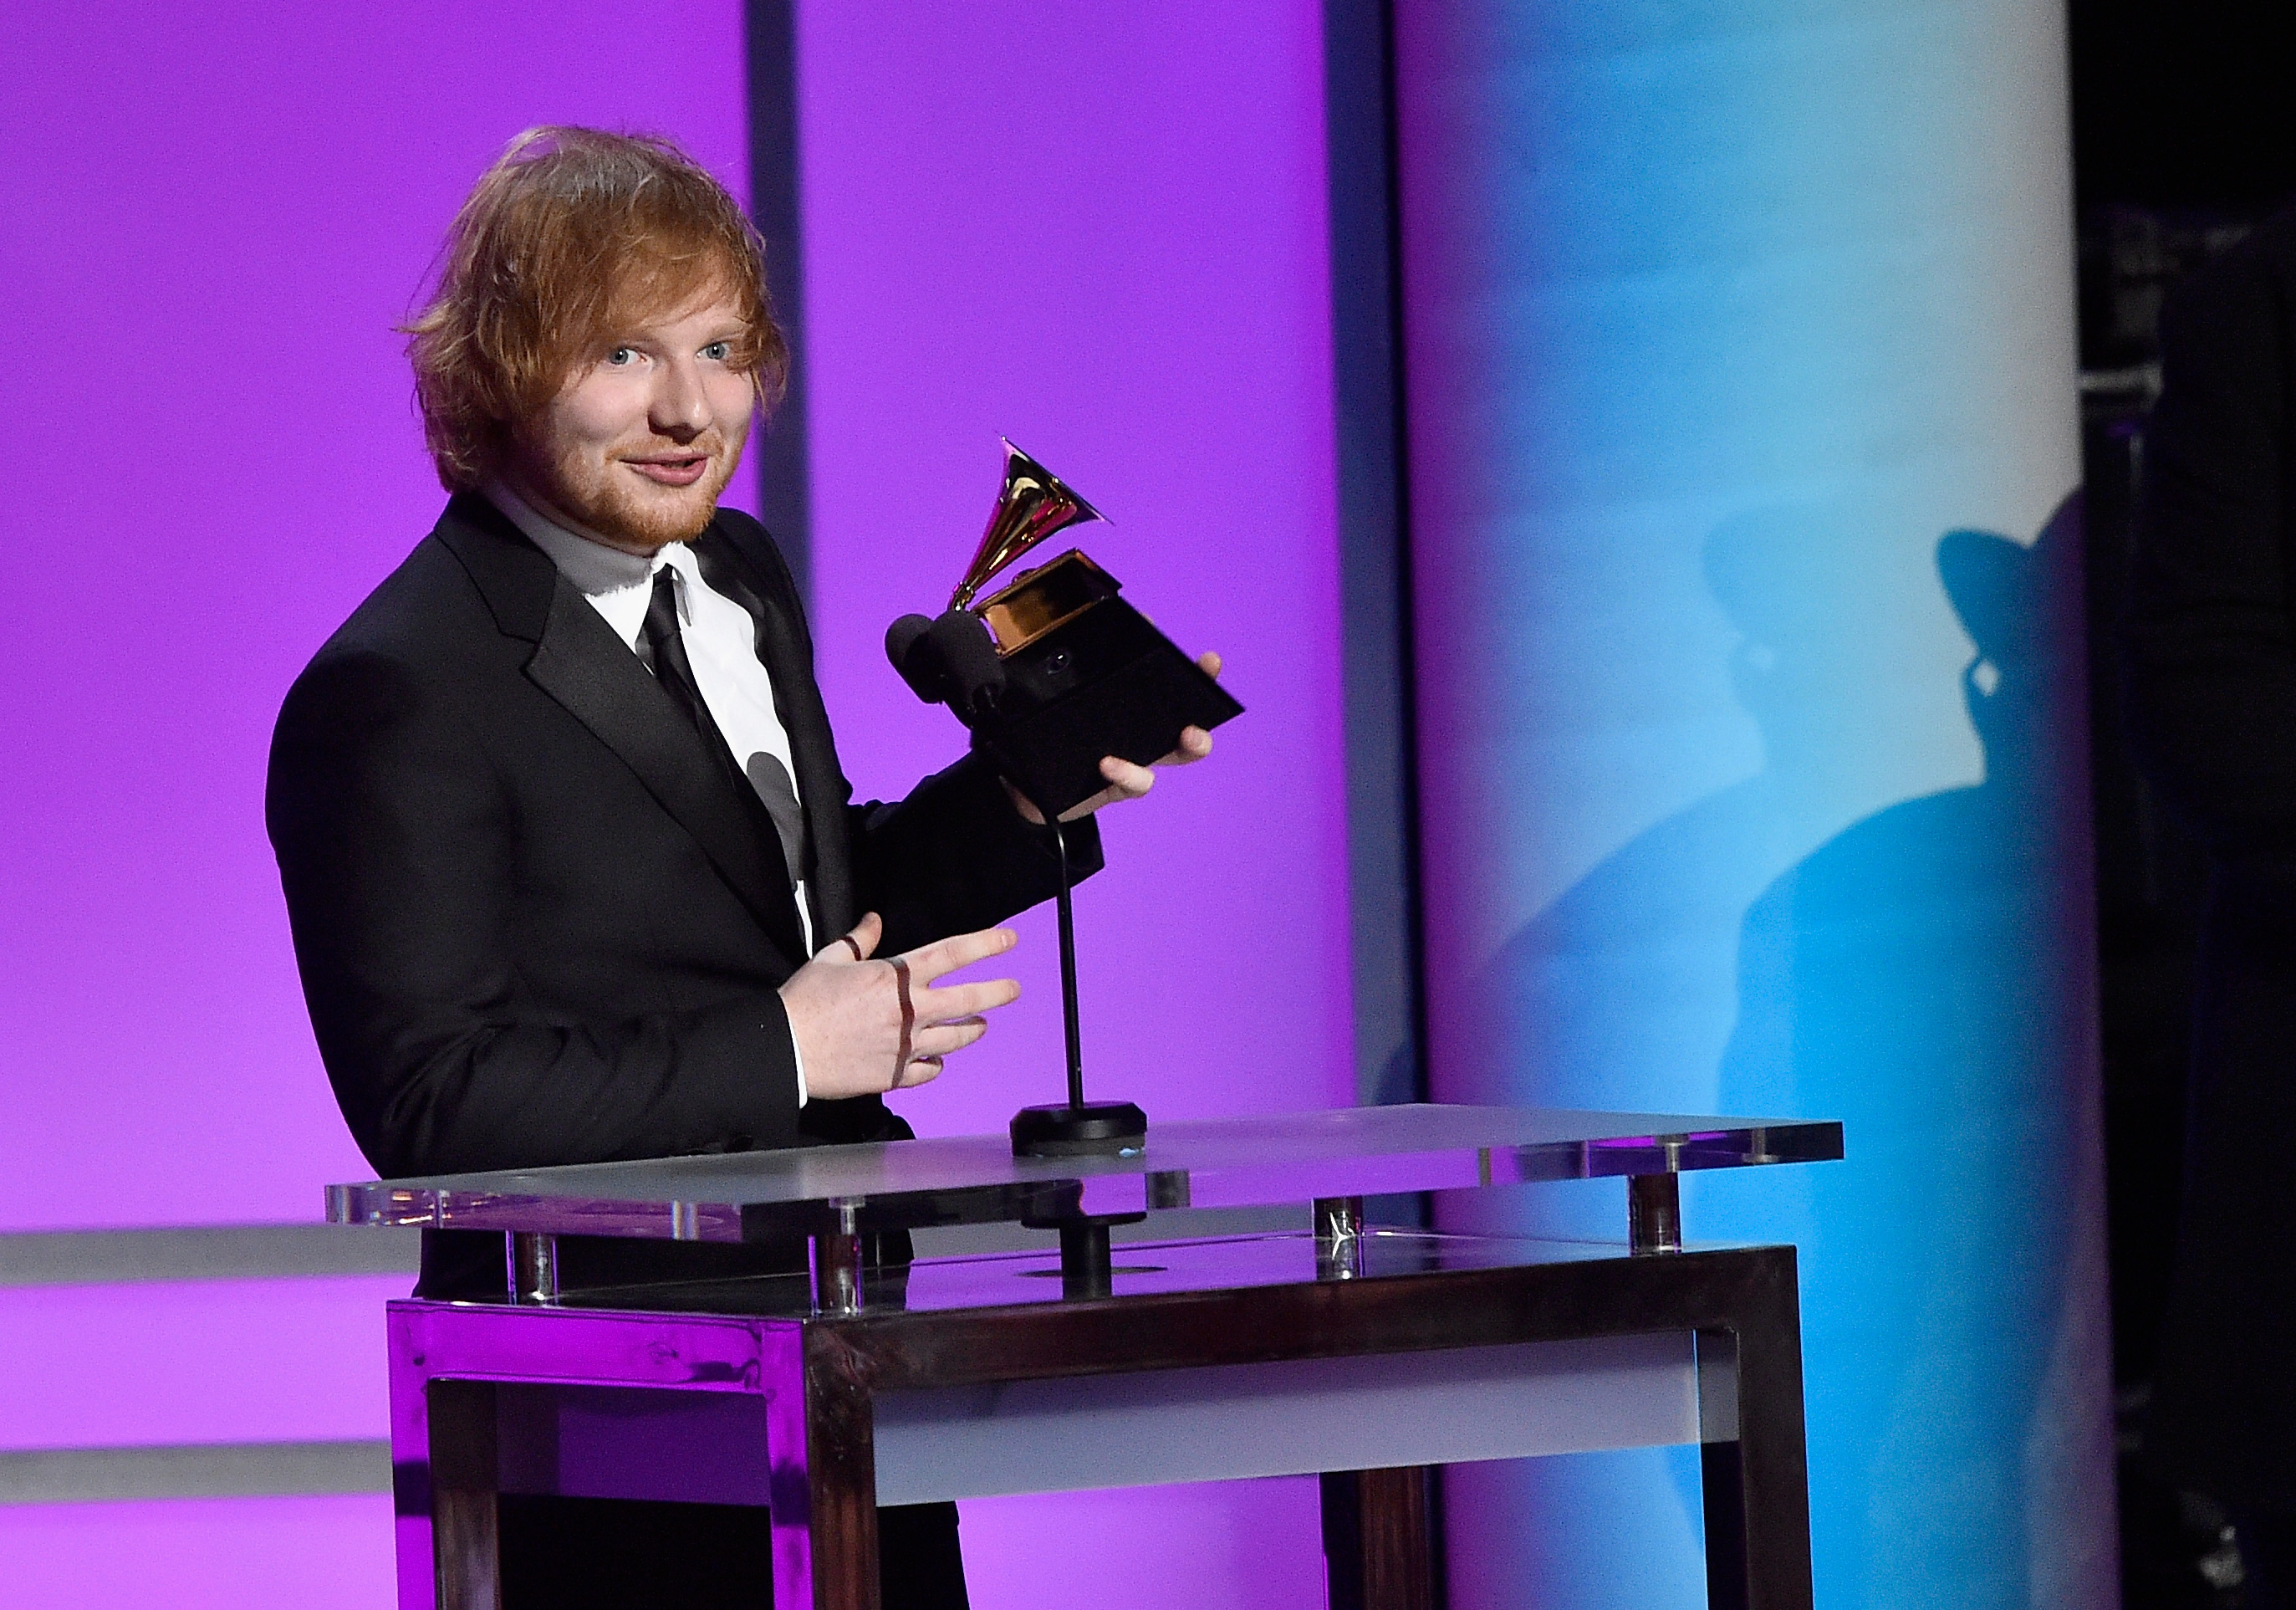 Singer-songwriter Ed Sheeran accepts the Grammy Award for Best Pop Solo Performance, for "Thinking Out Loud," onstage during the GRAMMY Pre-Telecast at The 58th GRAMMY Awards at Microsoft Theater on February 15, 2016 in Los Angeles, California. (Kevork Djansezian—Getty Images)